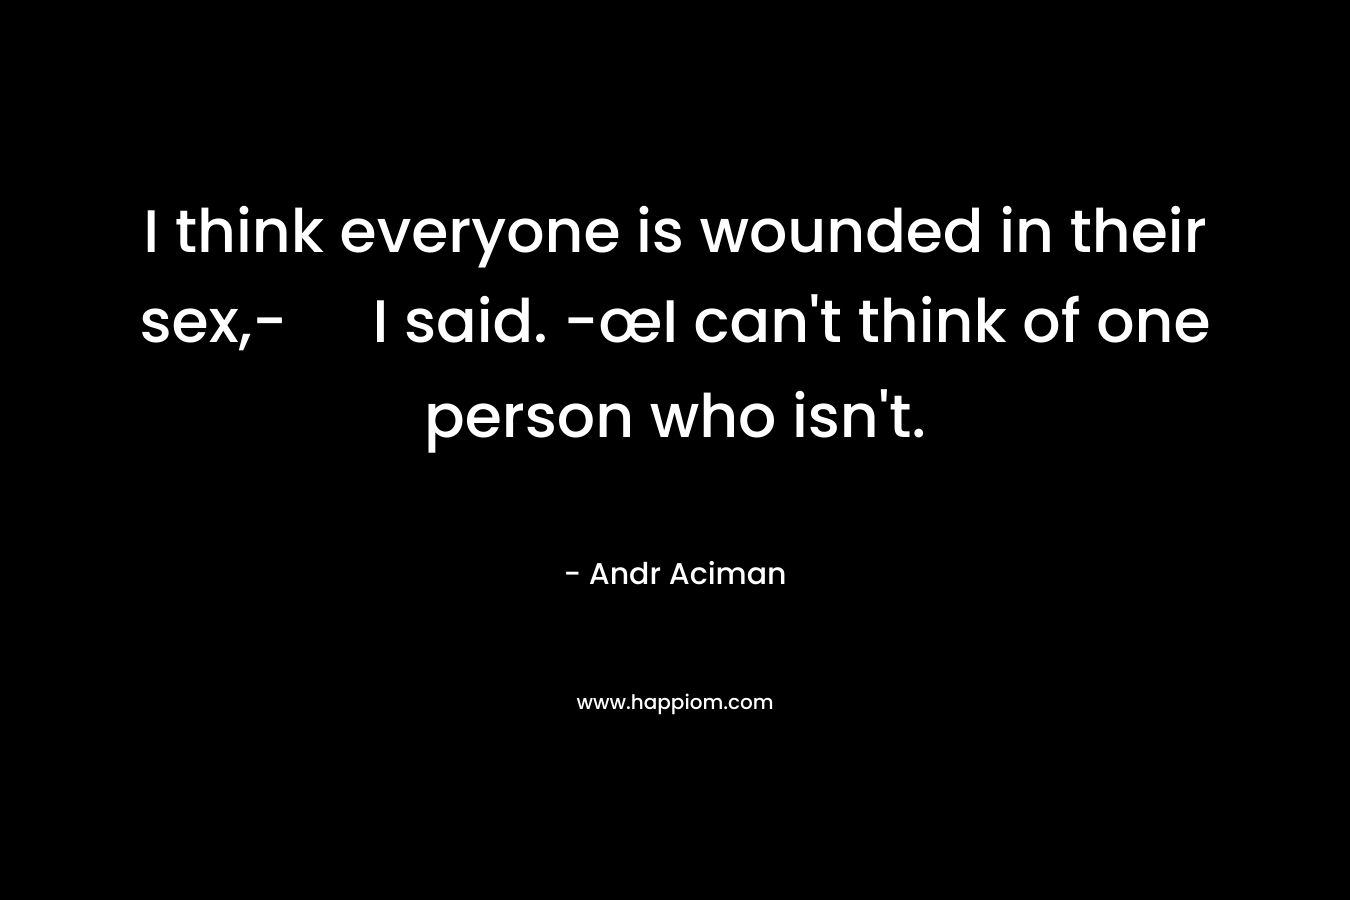 I think everyone is wounded in their sex,- I said. -œI can’t think of one person who isn’t. – Andr Aciman